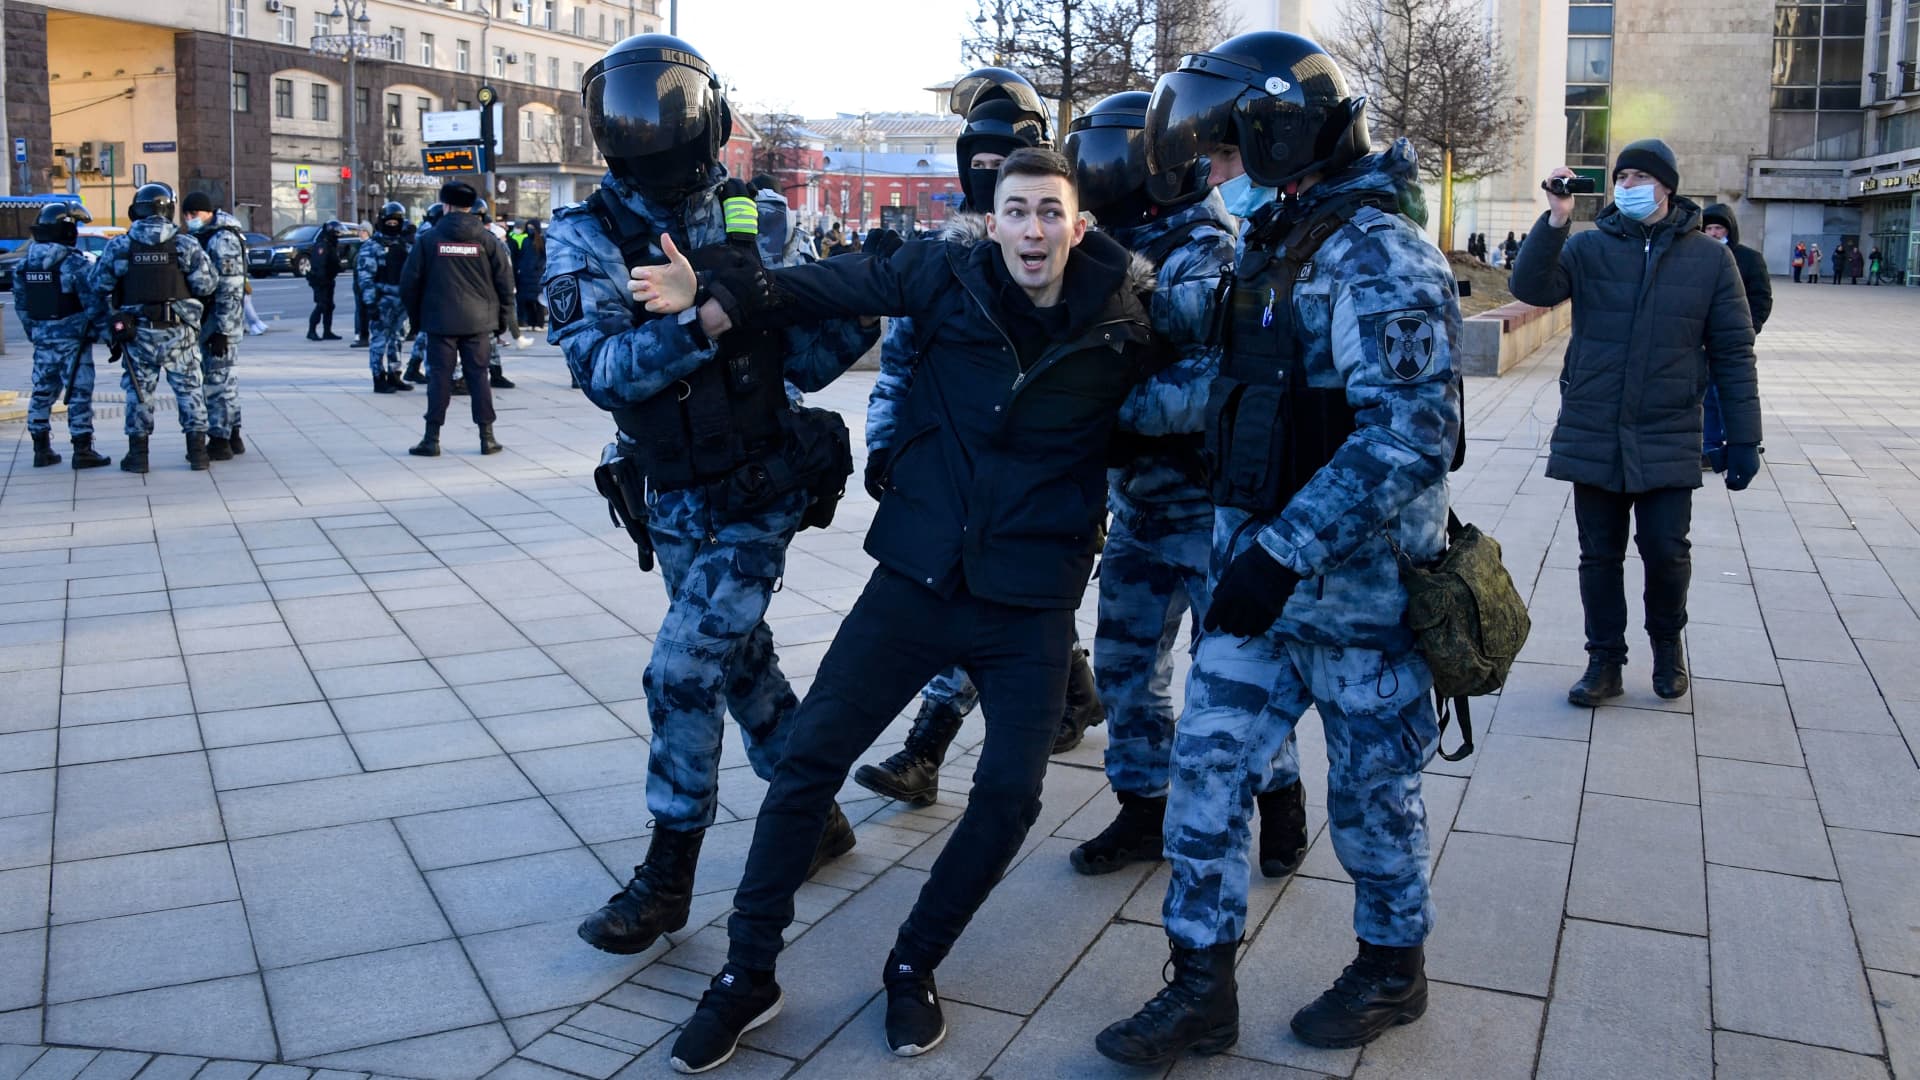 Police officers detain a man during a protest against Russia's invasion of Ukraine in central Moscow on February 27, 2022.